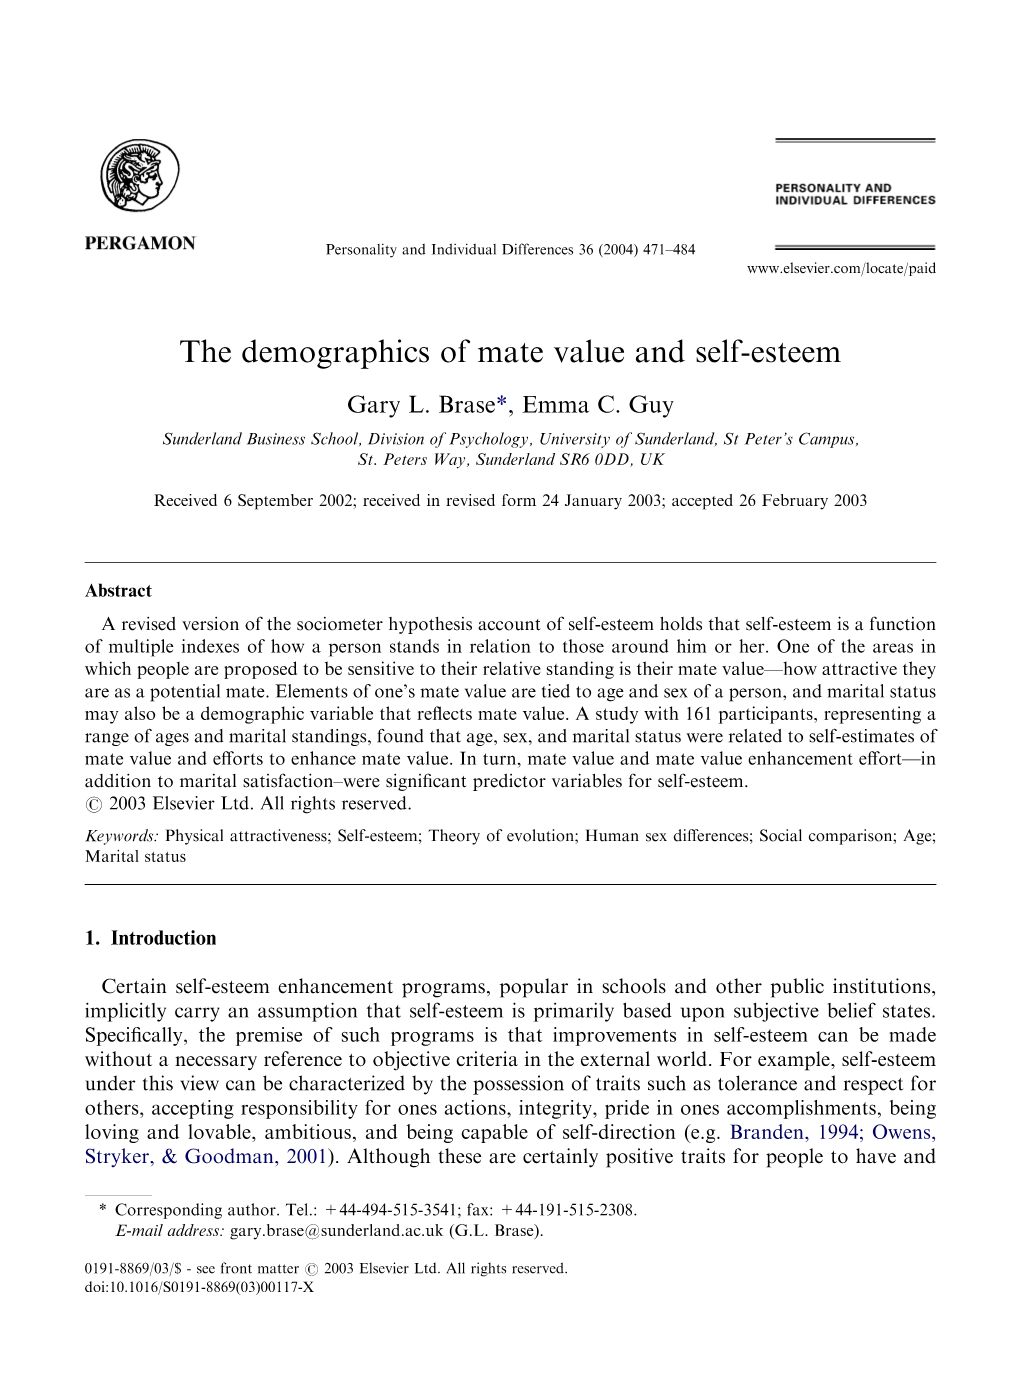 The Demographics of Mate Value and Self-Esteem